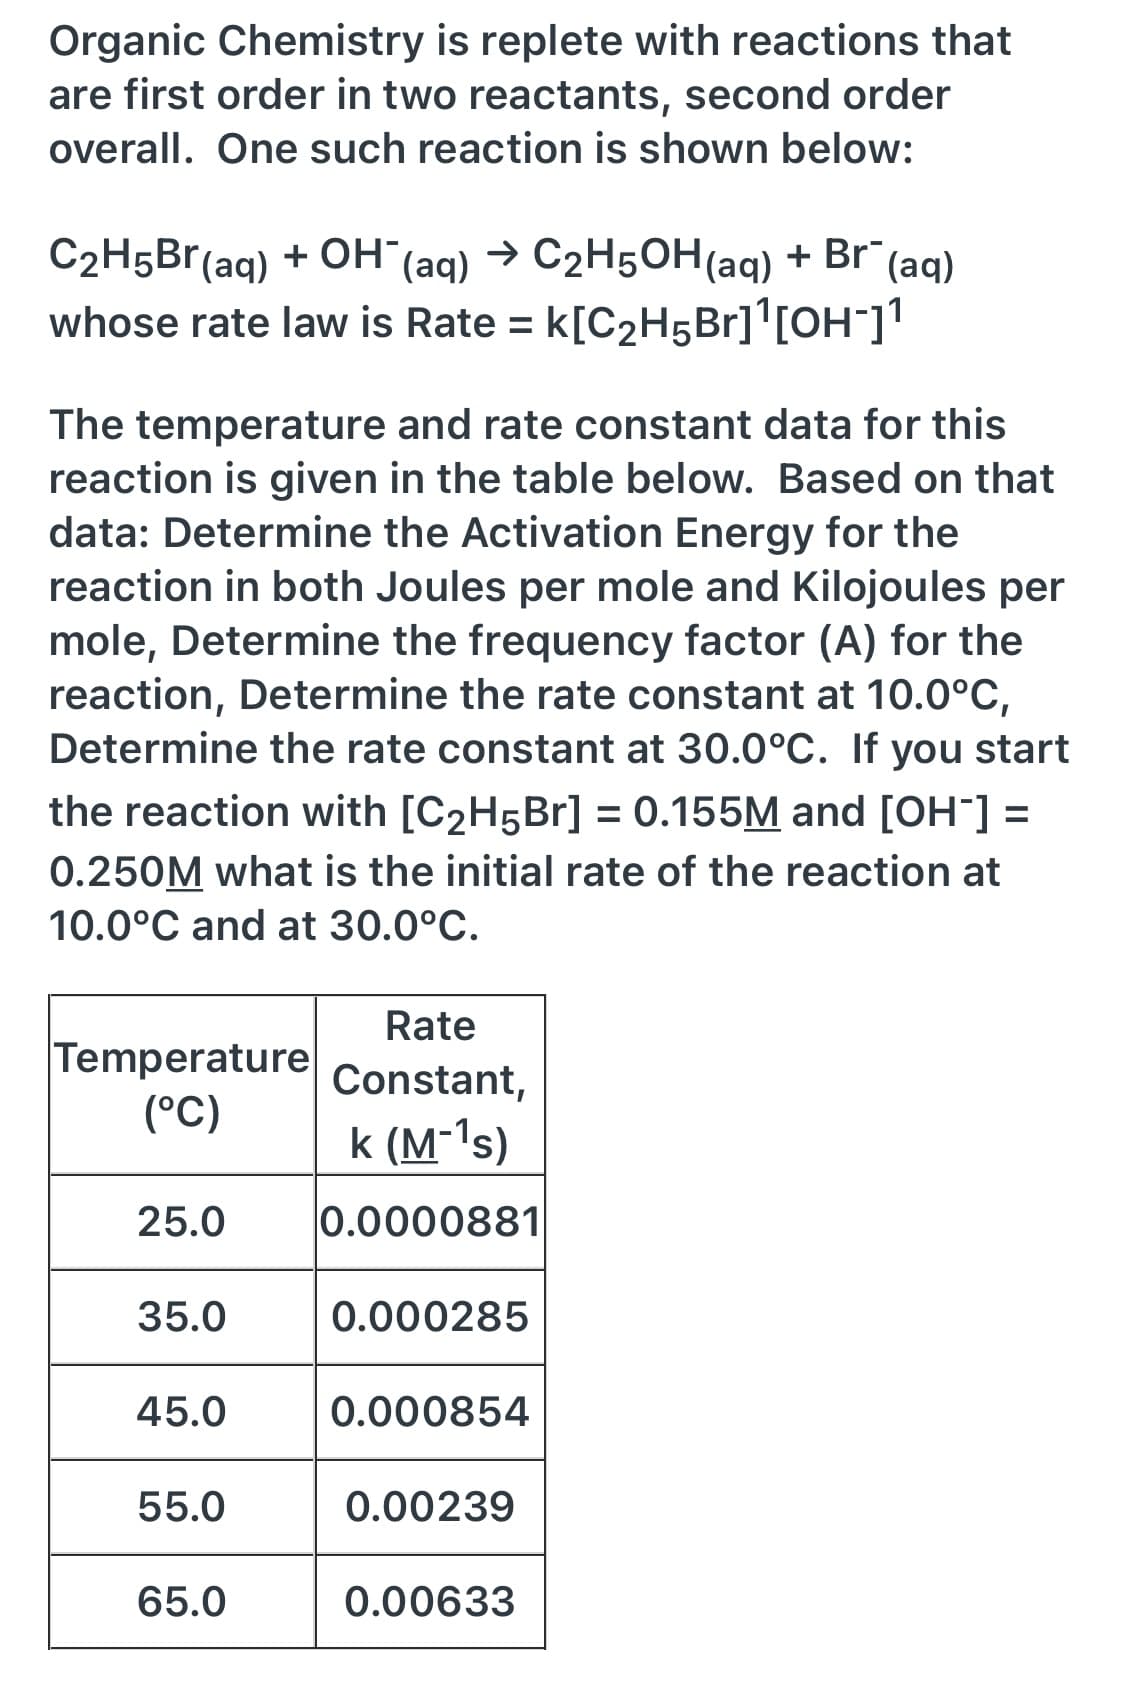 Organic Chemistry is replete with reactions that
are first order in two reactants, second order
overall. One such reaction is shown below:
C2H5Br(aq) + OH (aq)
whose rate law is Rate = k[C2H5B1]'[OH¯]'
→ C2H5OH(aq)
+ Br (aq)
The temperature and rate constant data for this
reaction is given in the table below. Based on that
data: Determine the Activation Energy for the
reaction in both Joules per mole and Kilojoules per
mole, Determine the frequency factor (A) for the
reaction, Determine the rate constant at 10.0°C,
Determine the rate constant at 30.0°C. If you start
the reaction with [C2H5B1] = 0.155M and [OH¯] =
0.250M what is the initial rate of the reaction at
10.0°C and at 30.0°C.
Rate
Temperature
(°C)
Constant,
k (M-'s)
25.0
0.0000881
35.0
0.000285
45.0
0.000854
55.0
0.00239
65.0
0.00633
